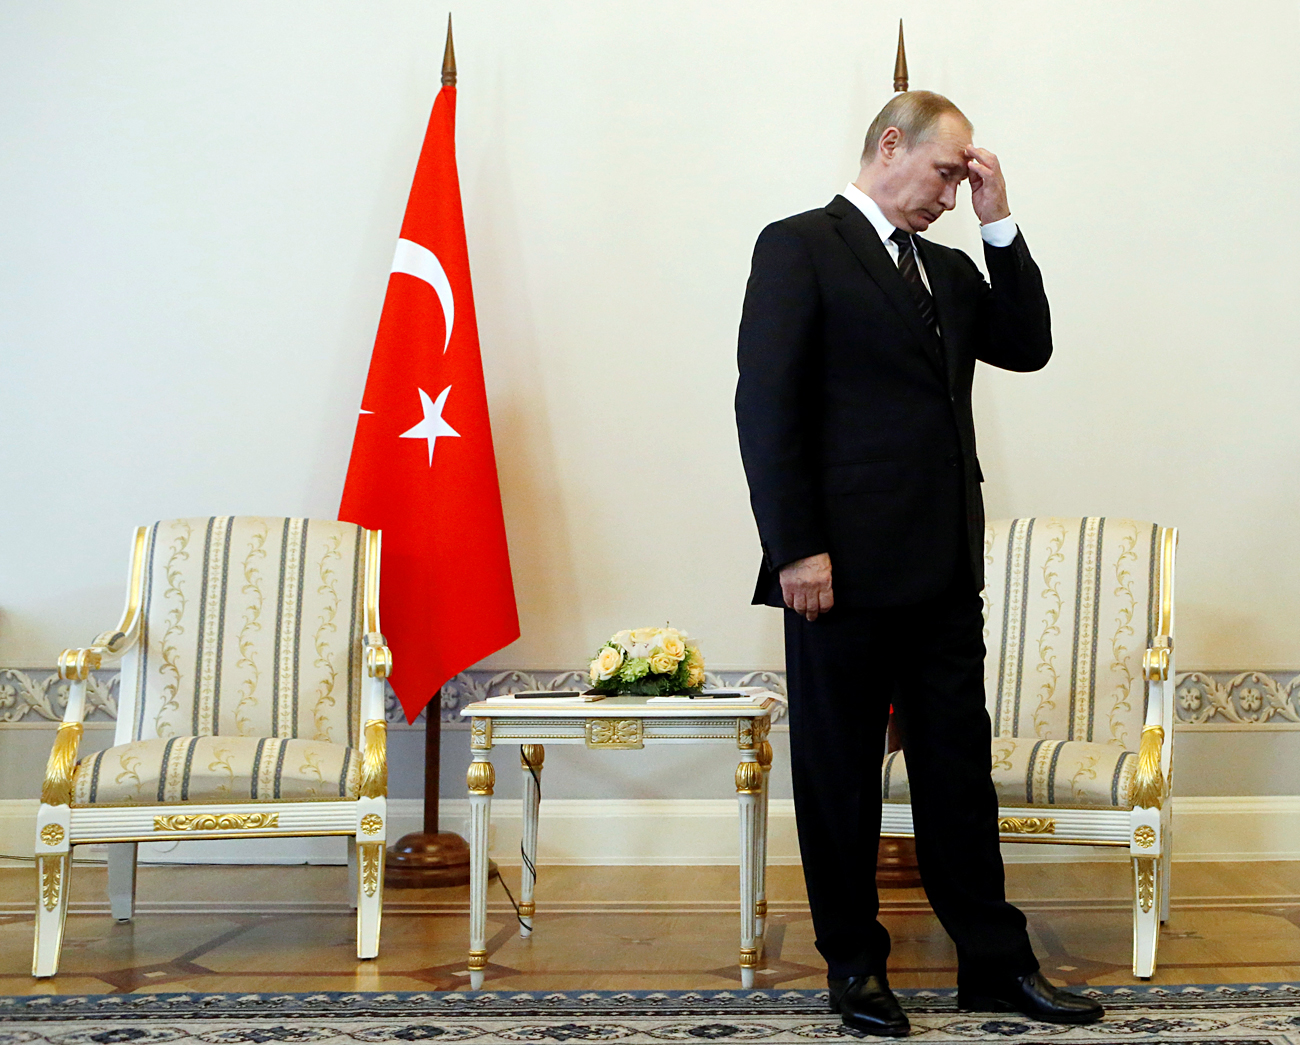 Russian President Vladimir Putin attends a meeting with Turkish President Tayyip Erdogan in St. Petersburg, Russia, on Aug. 9, 2016.